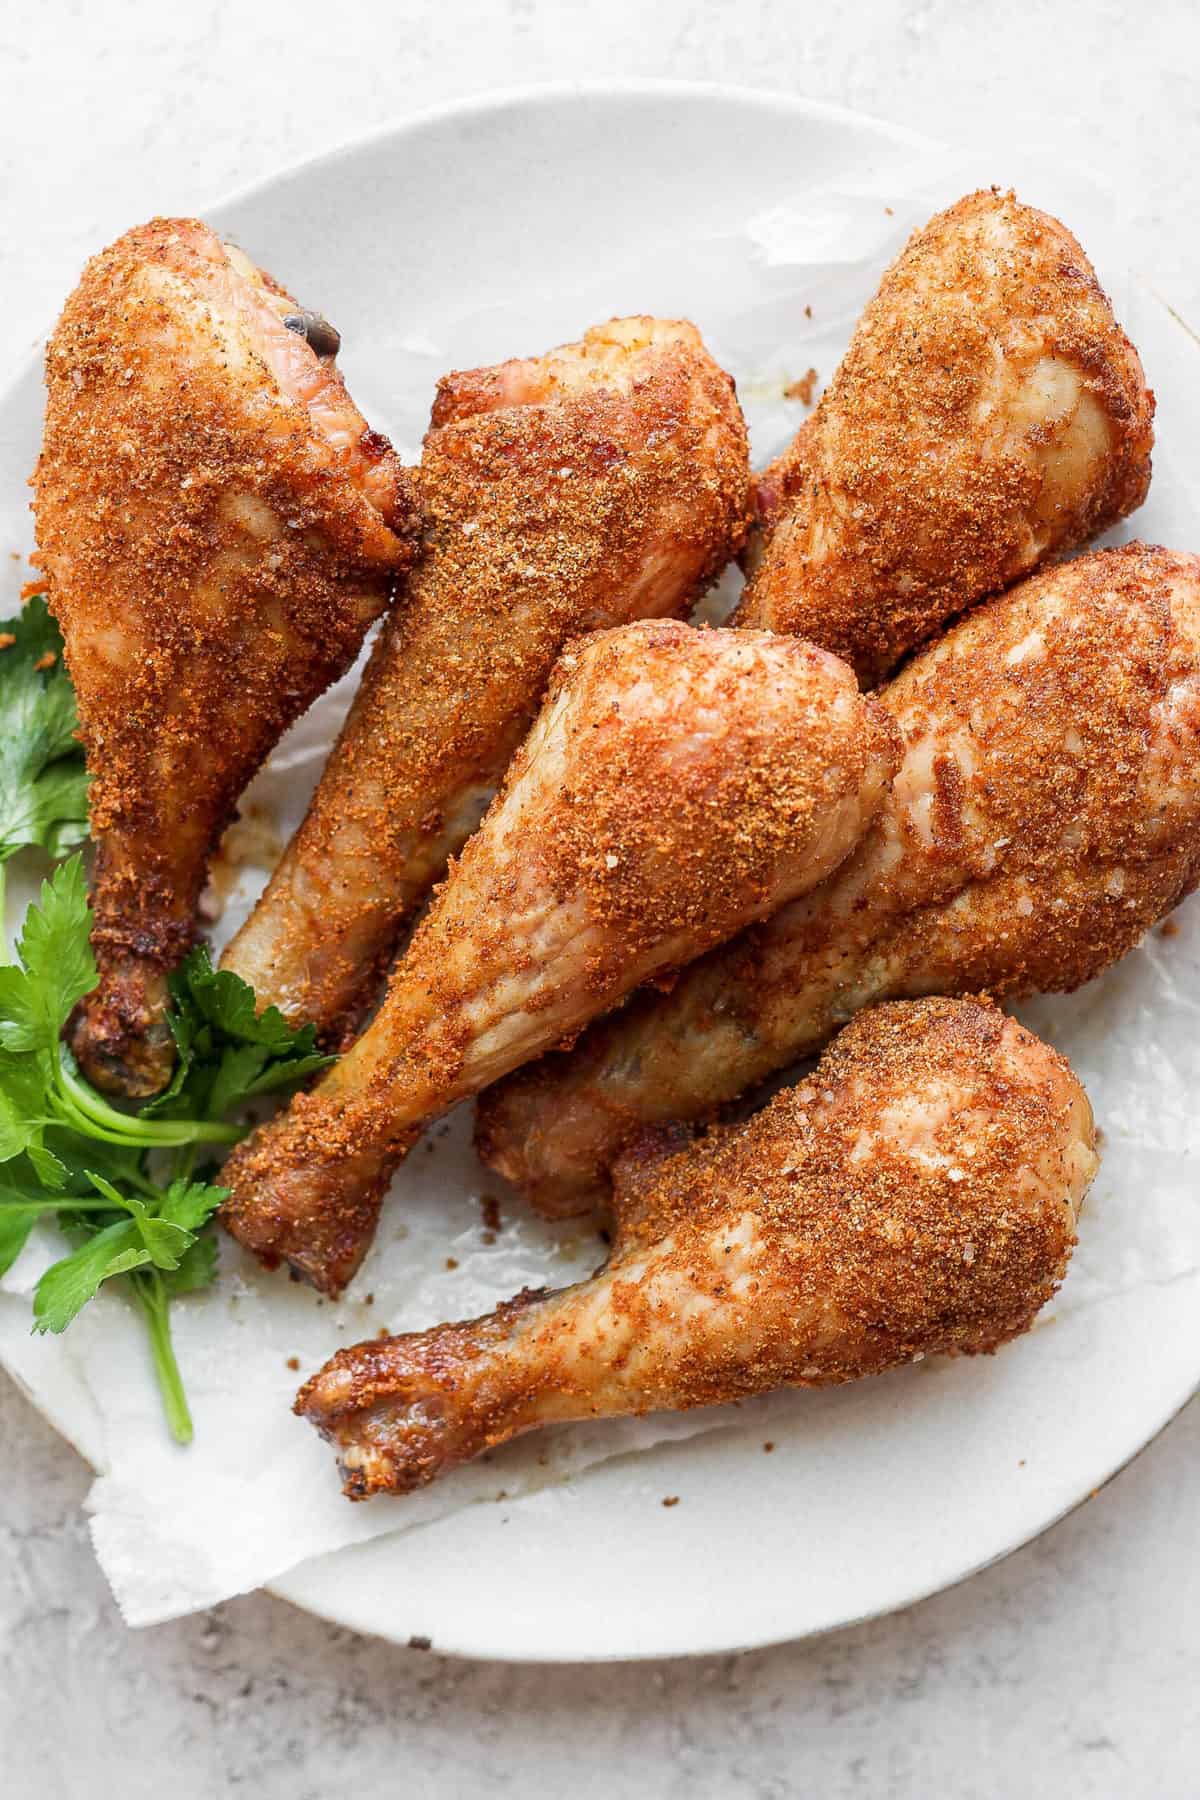 Easy Smoked Chicken Legs (+ dry rub!) - Fit Foodie Finds